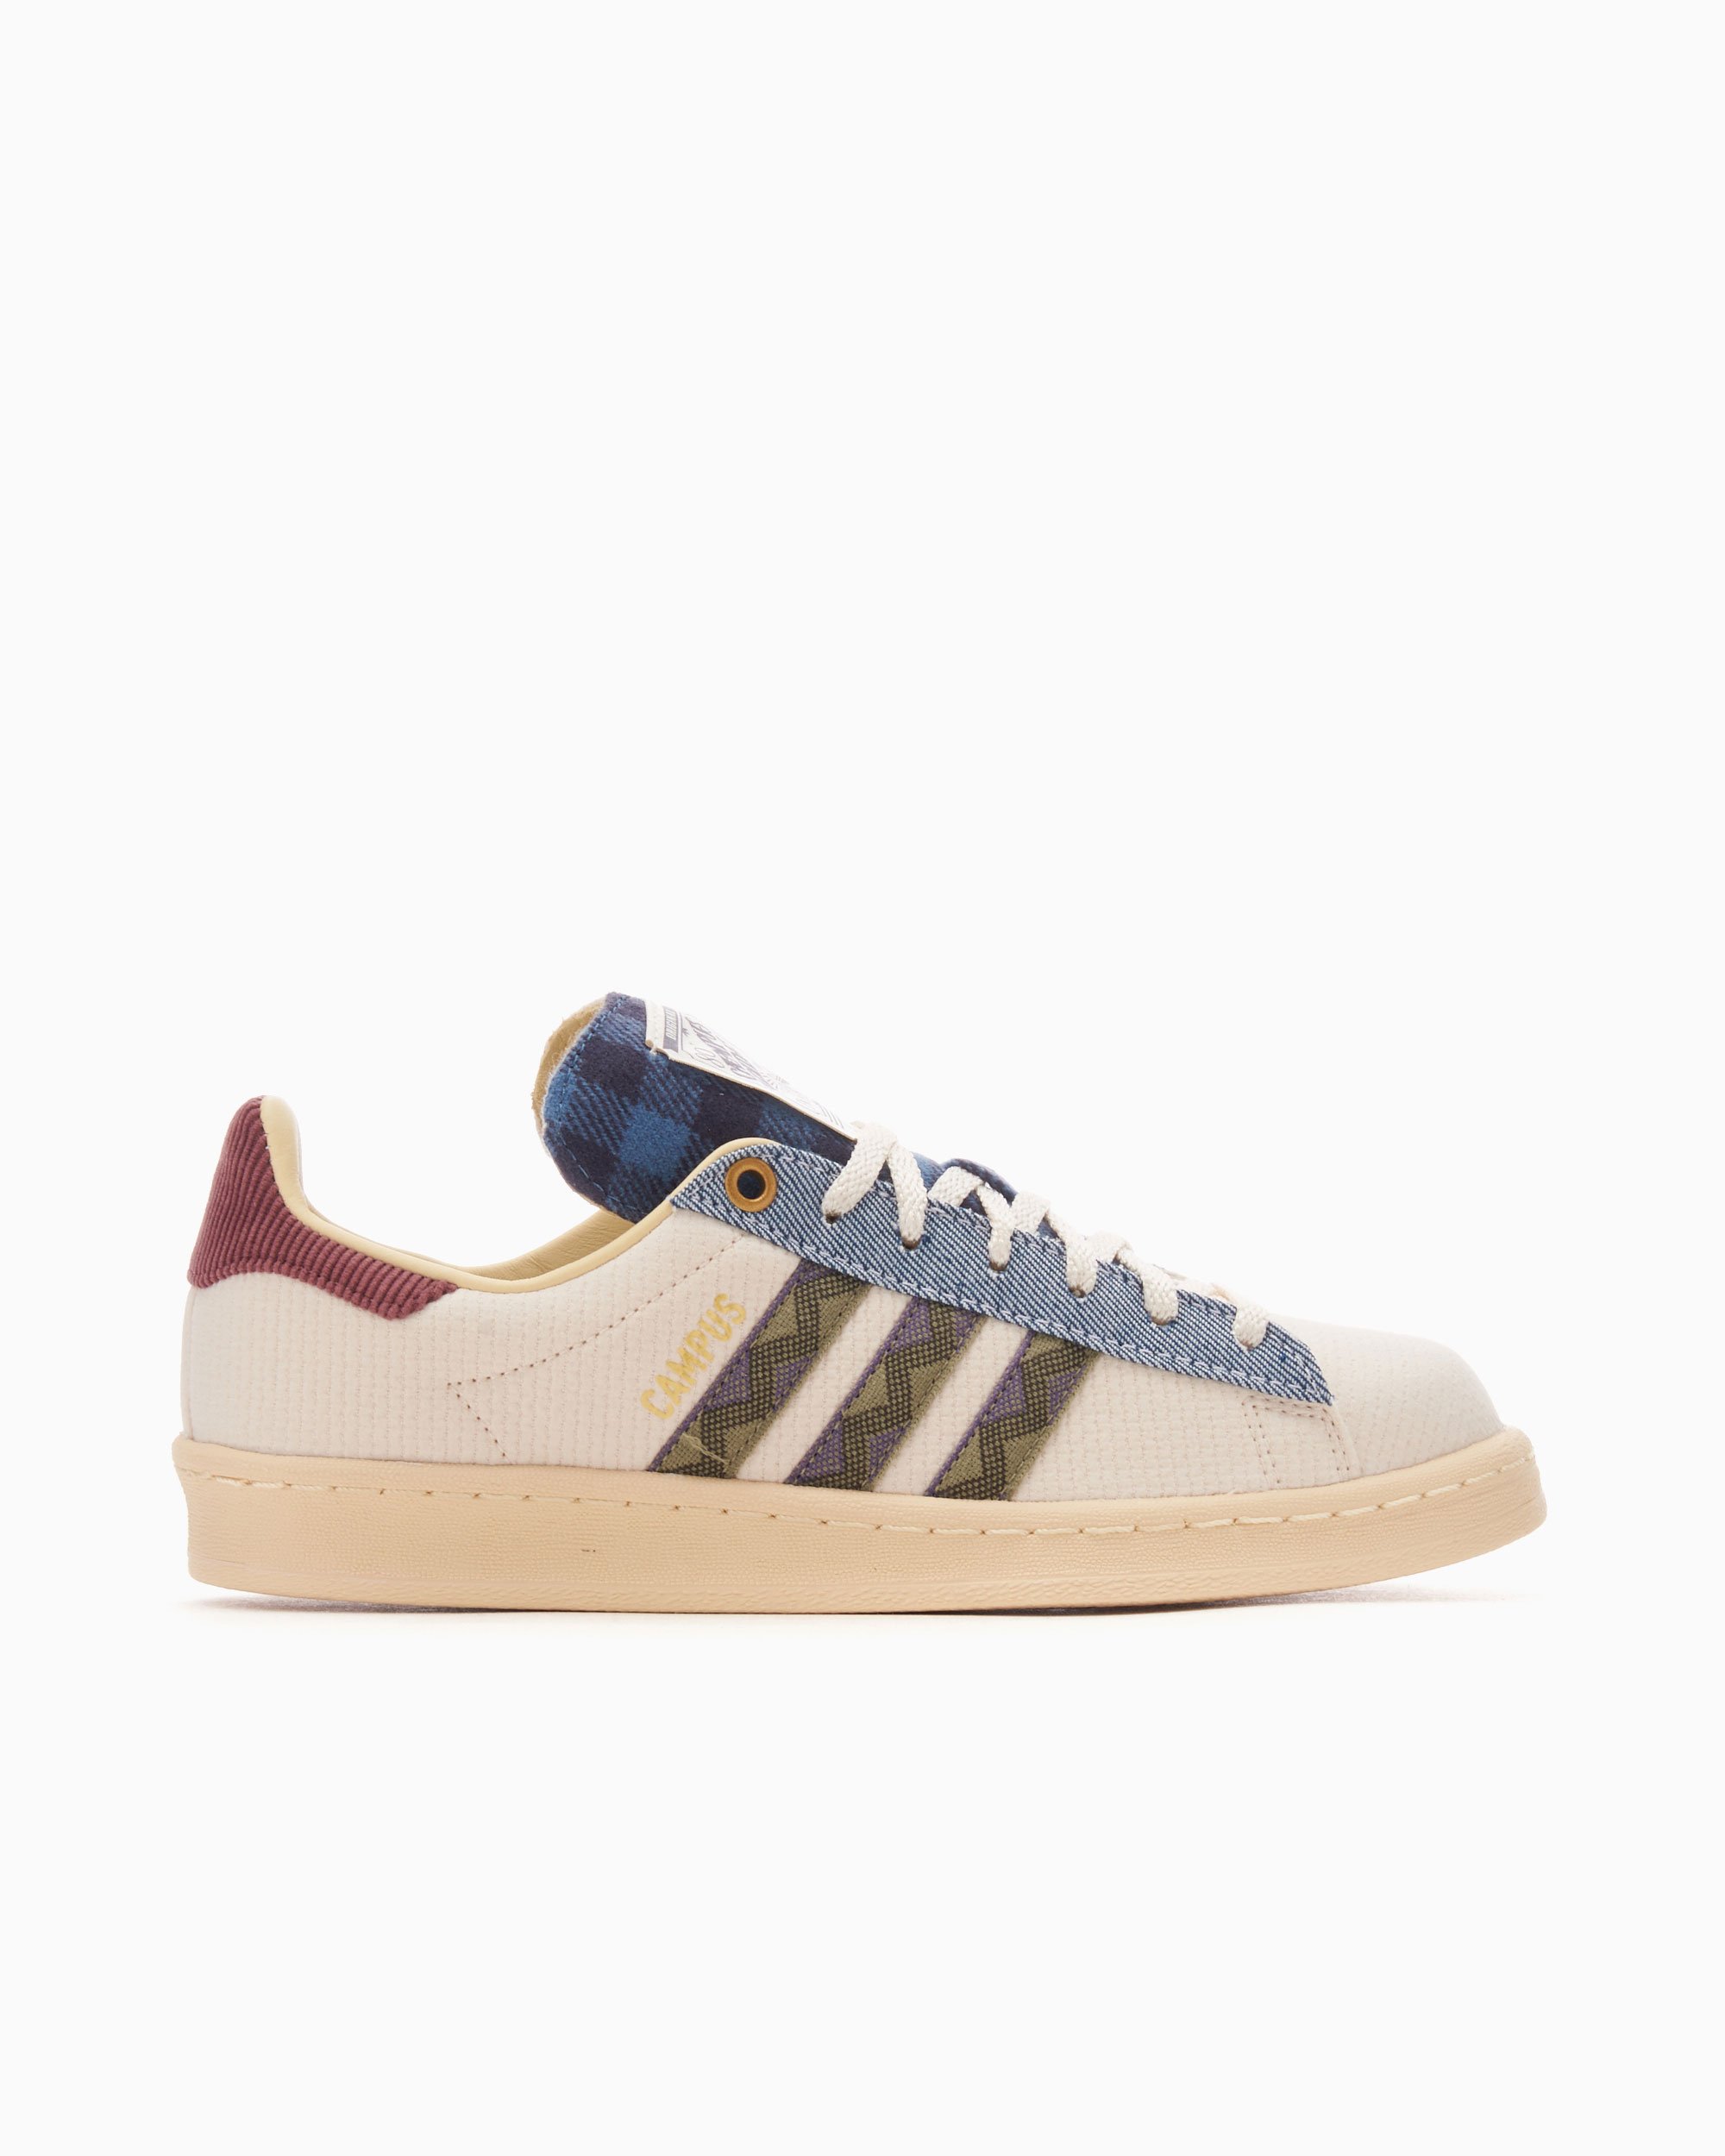 Cena pistola Excesivo adidas Campus 80s Los Angeles White GY4598| Buy Online at FOOTDISTRICT